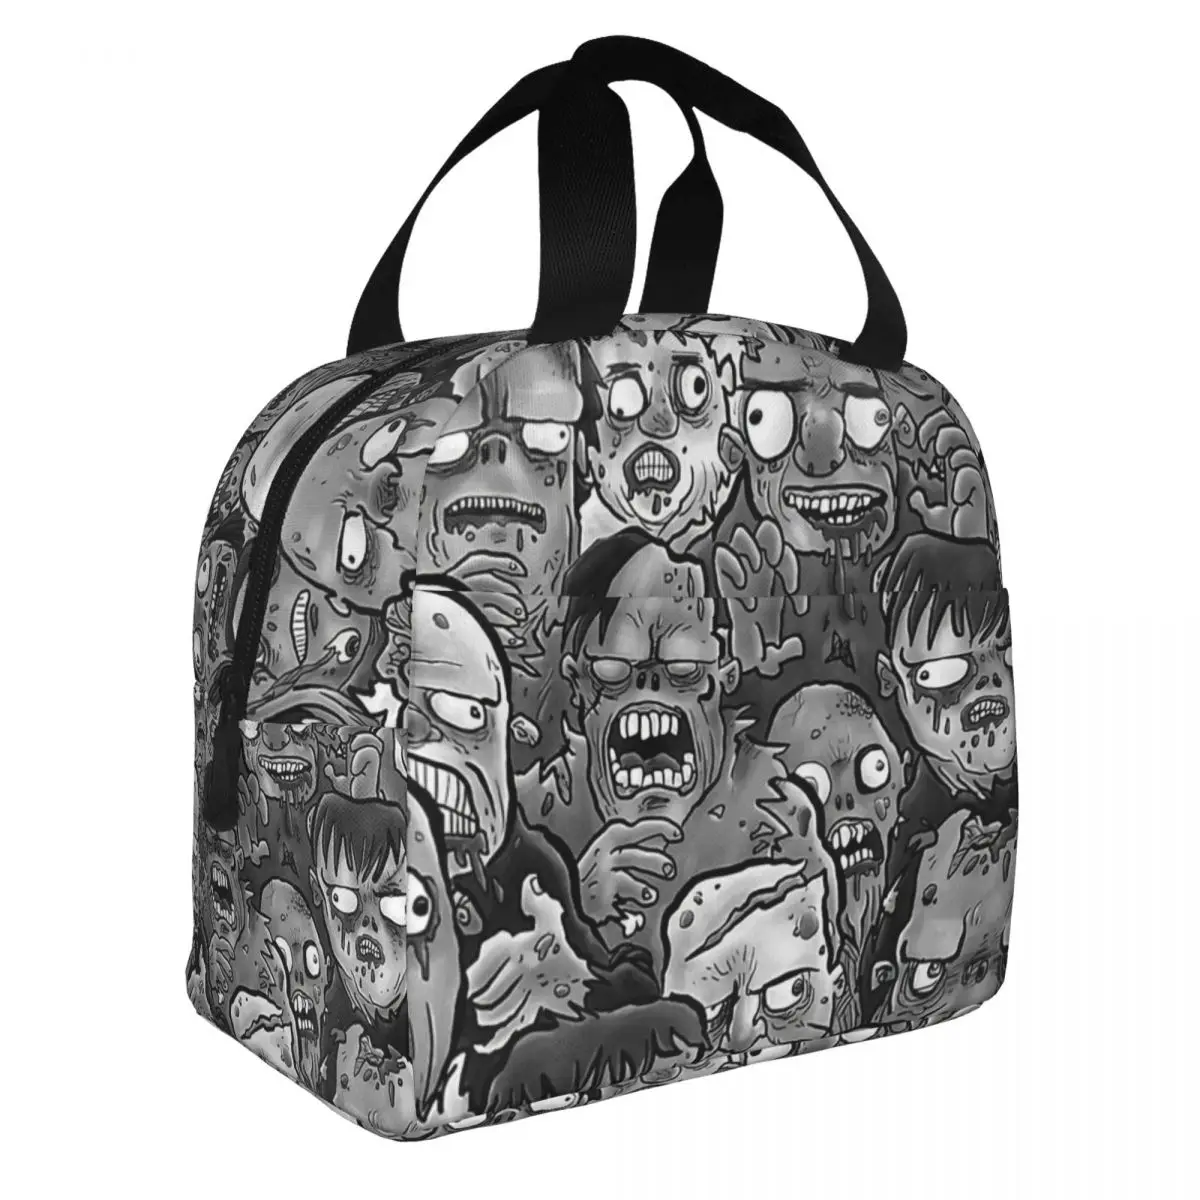 Zombiefied Lunch Bento Bags Portable Aluminum Foil thickened Thermal Cloth Lunch Bag for Women Men Boy